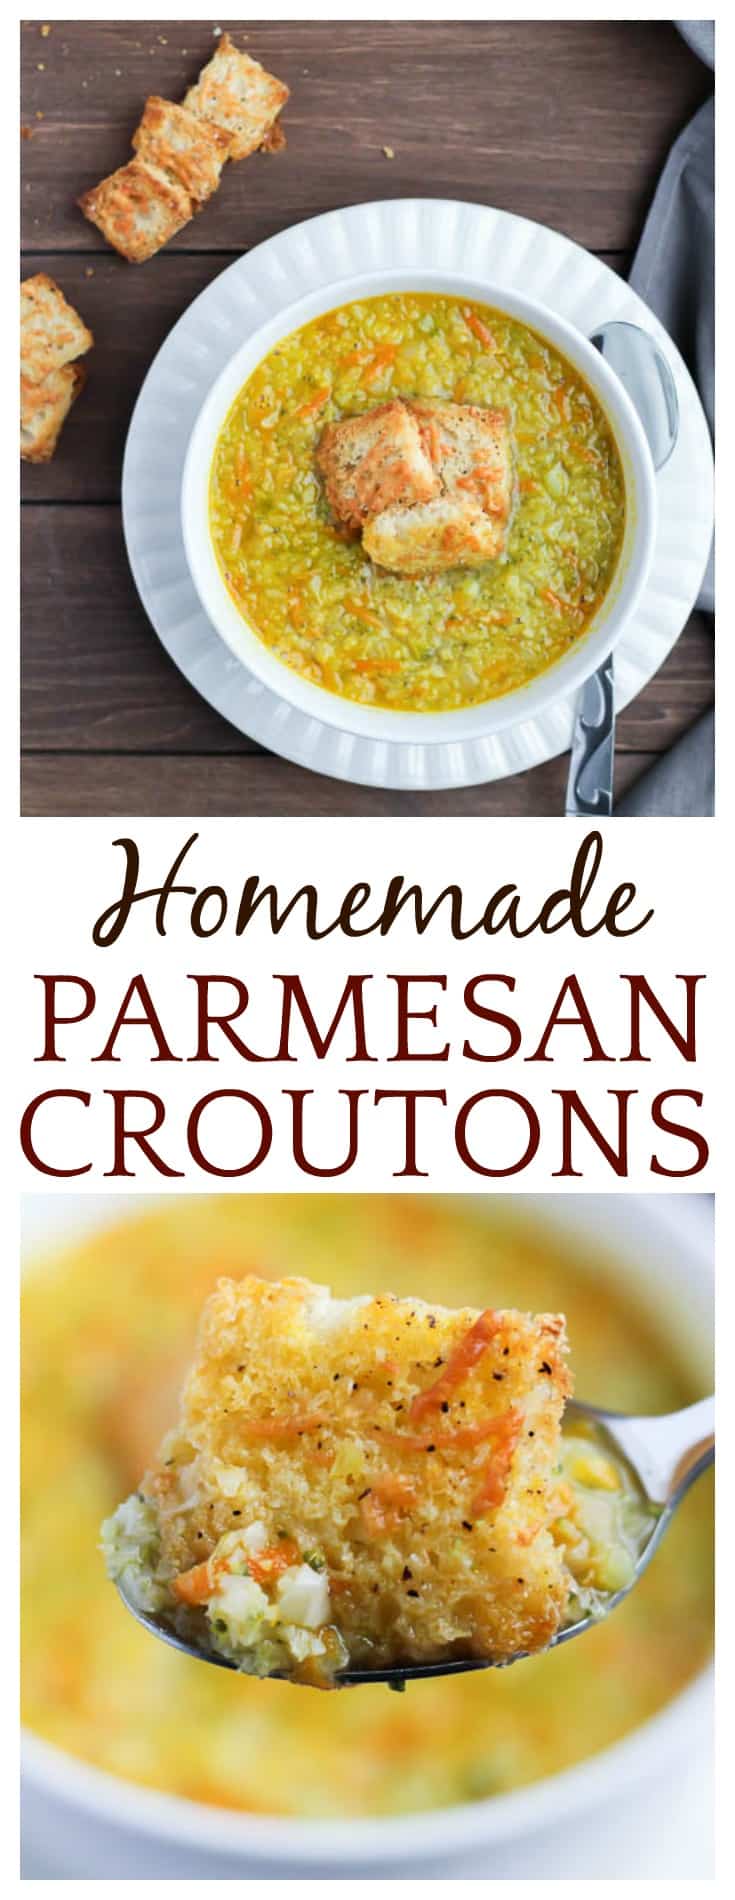 Once you see how easy and delicious Homemade Parmesan Croutons are, you will never go back to store-bought! These homemade croutons taste great on top of soups and salads! | #DLB #croutons #homemade #soup #salad #easyrecipes